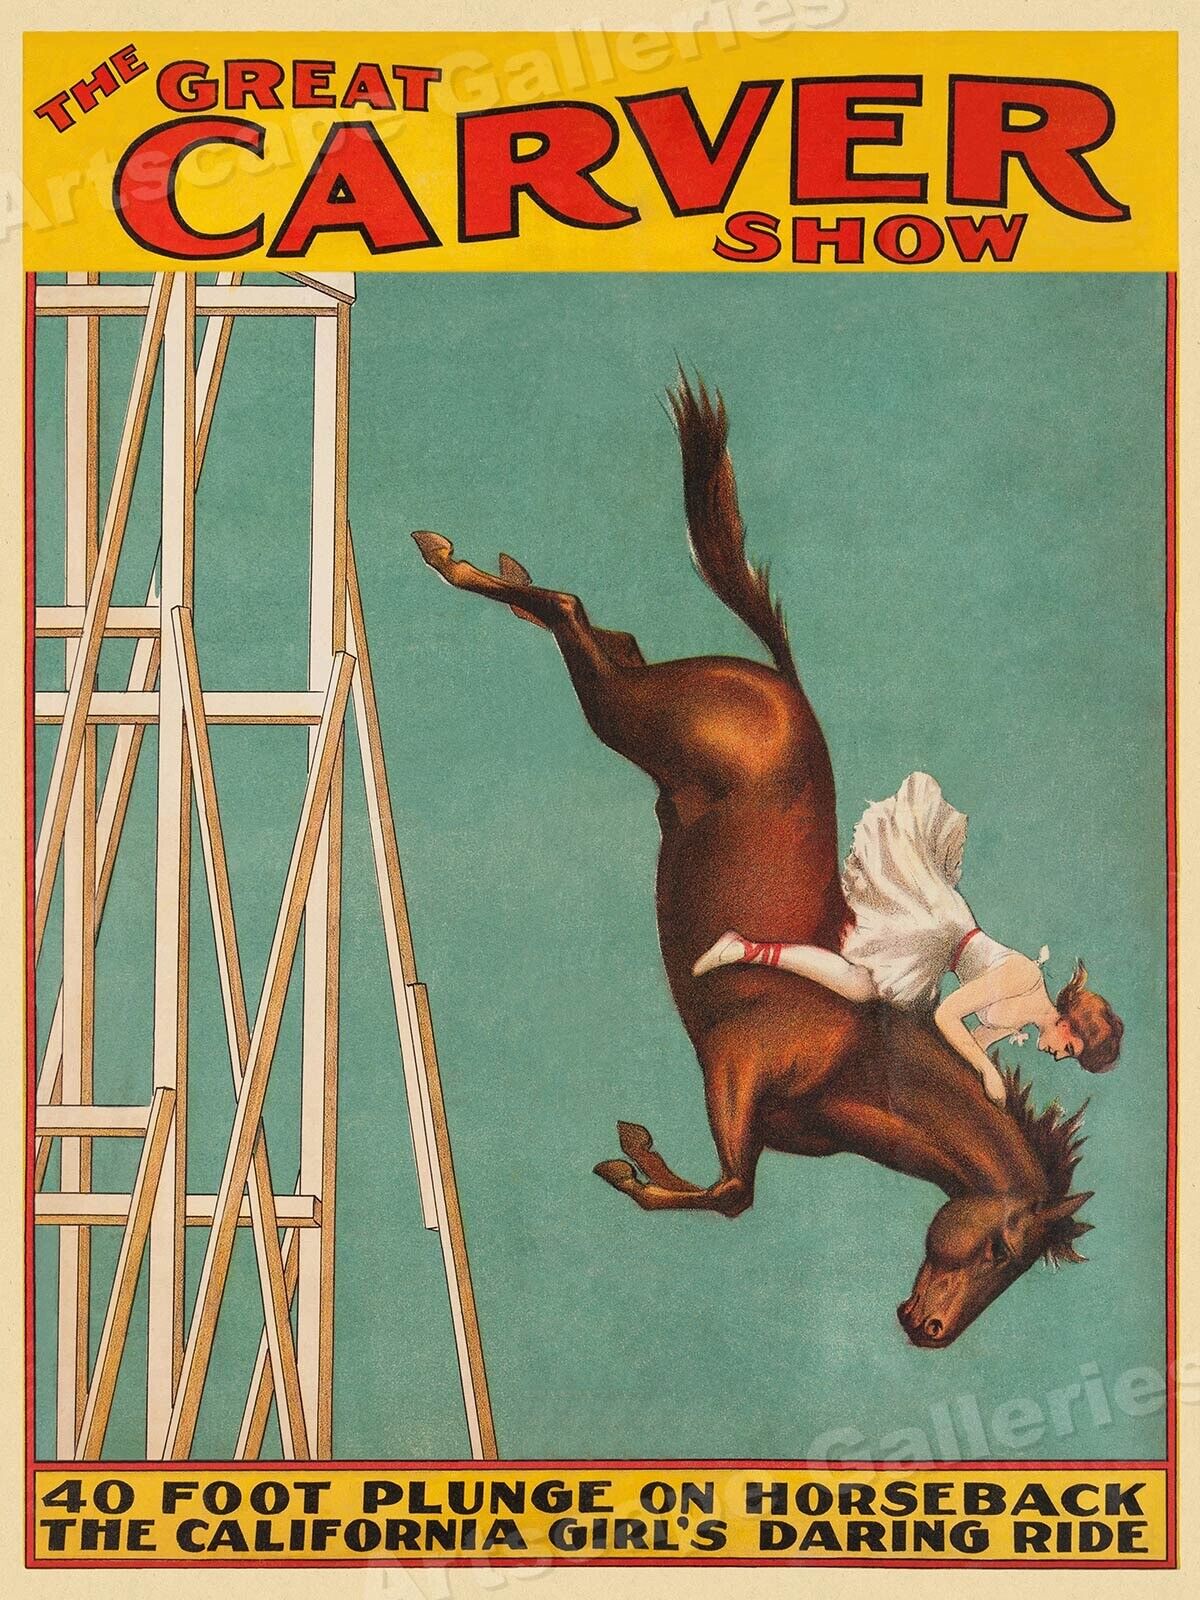 1920s “The Great Carver Show” Atlantic City Steel Pier Horse Diving Poster 20x28